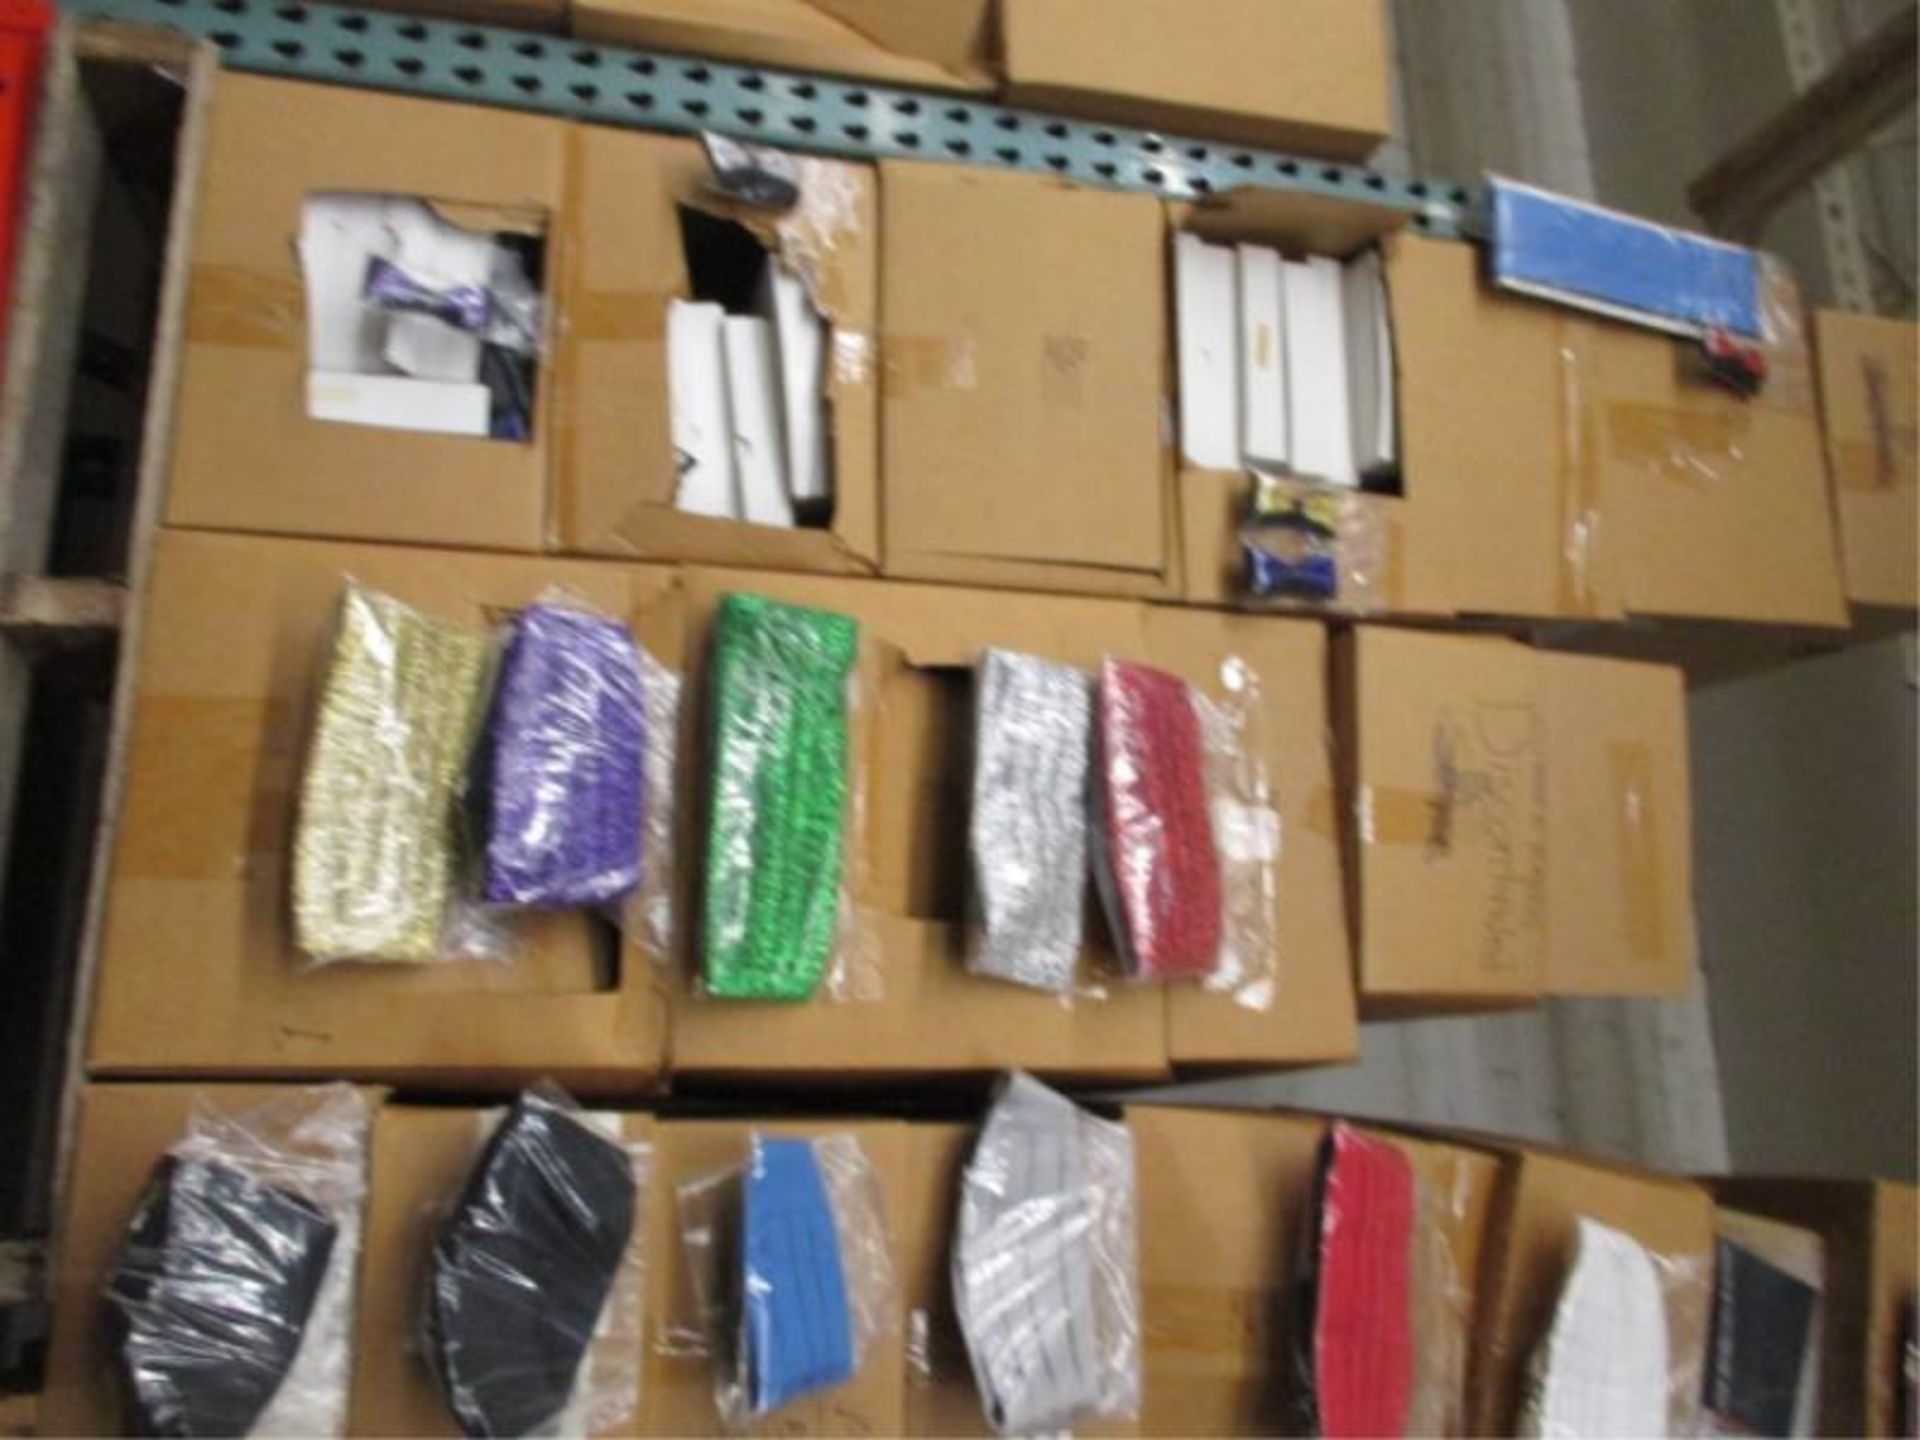 Lot Misc Tux Accessories, Cummerbunds, Bow Ties, Etc. Approx. 58 Boxes, Many Colors & Styles - Image 2 of 4